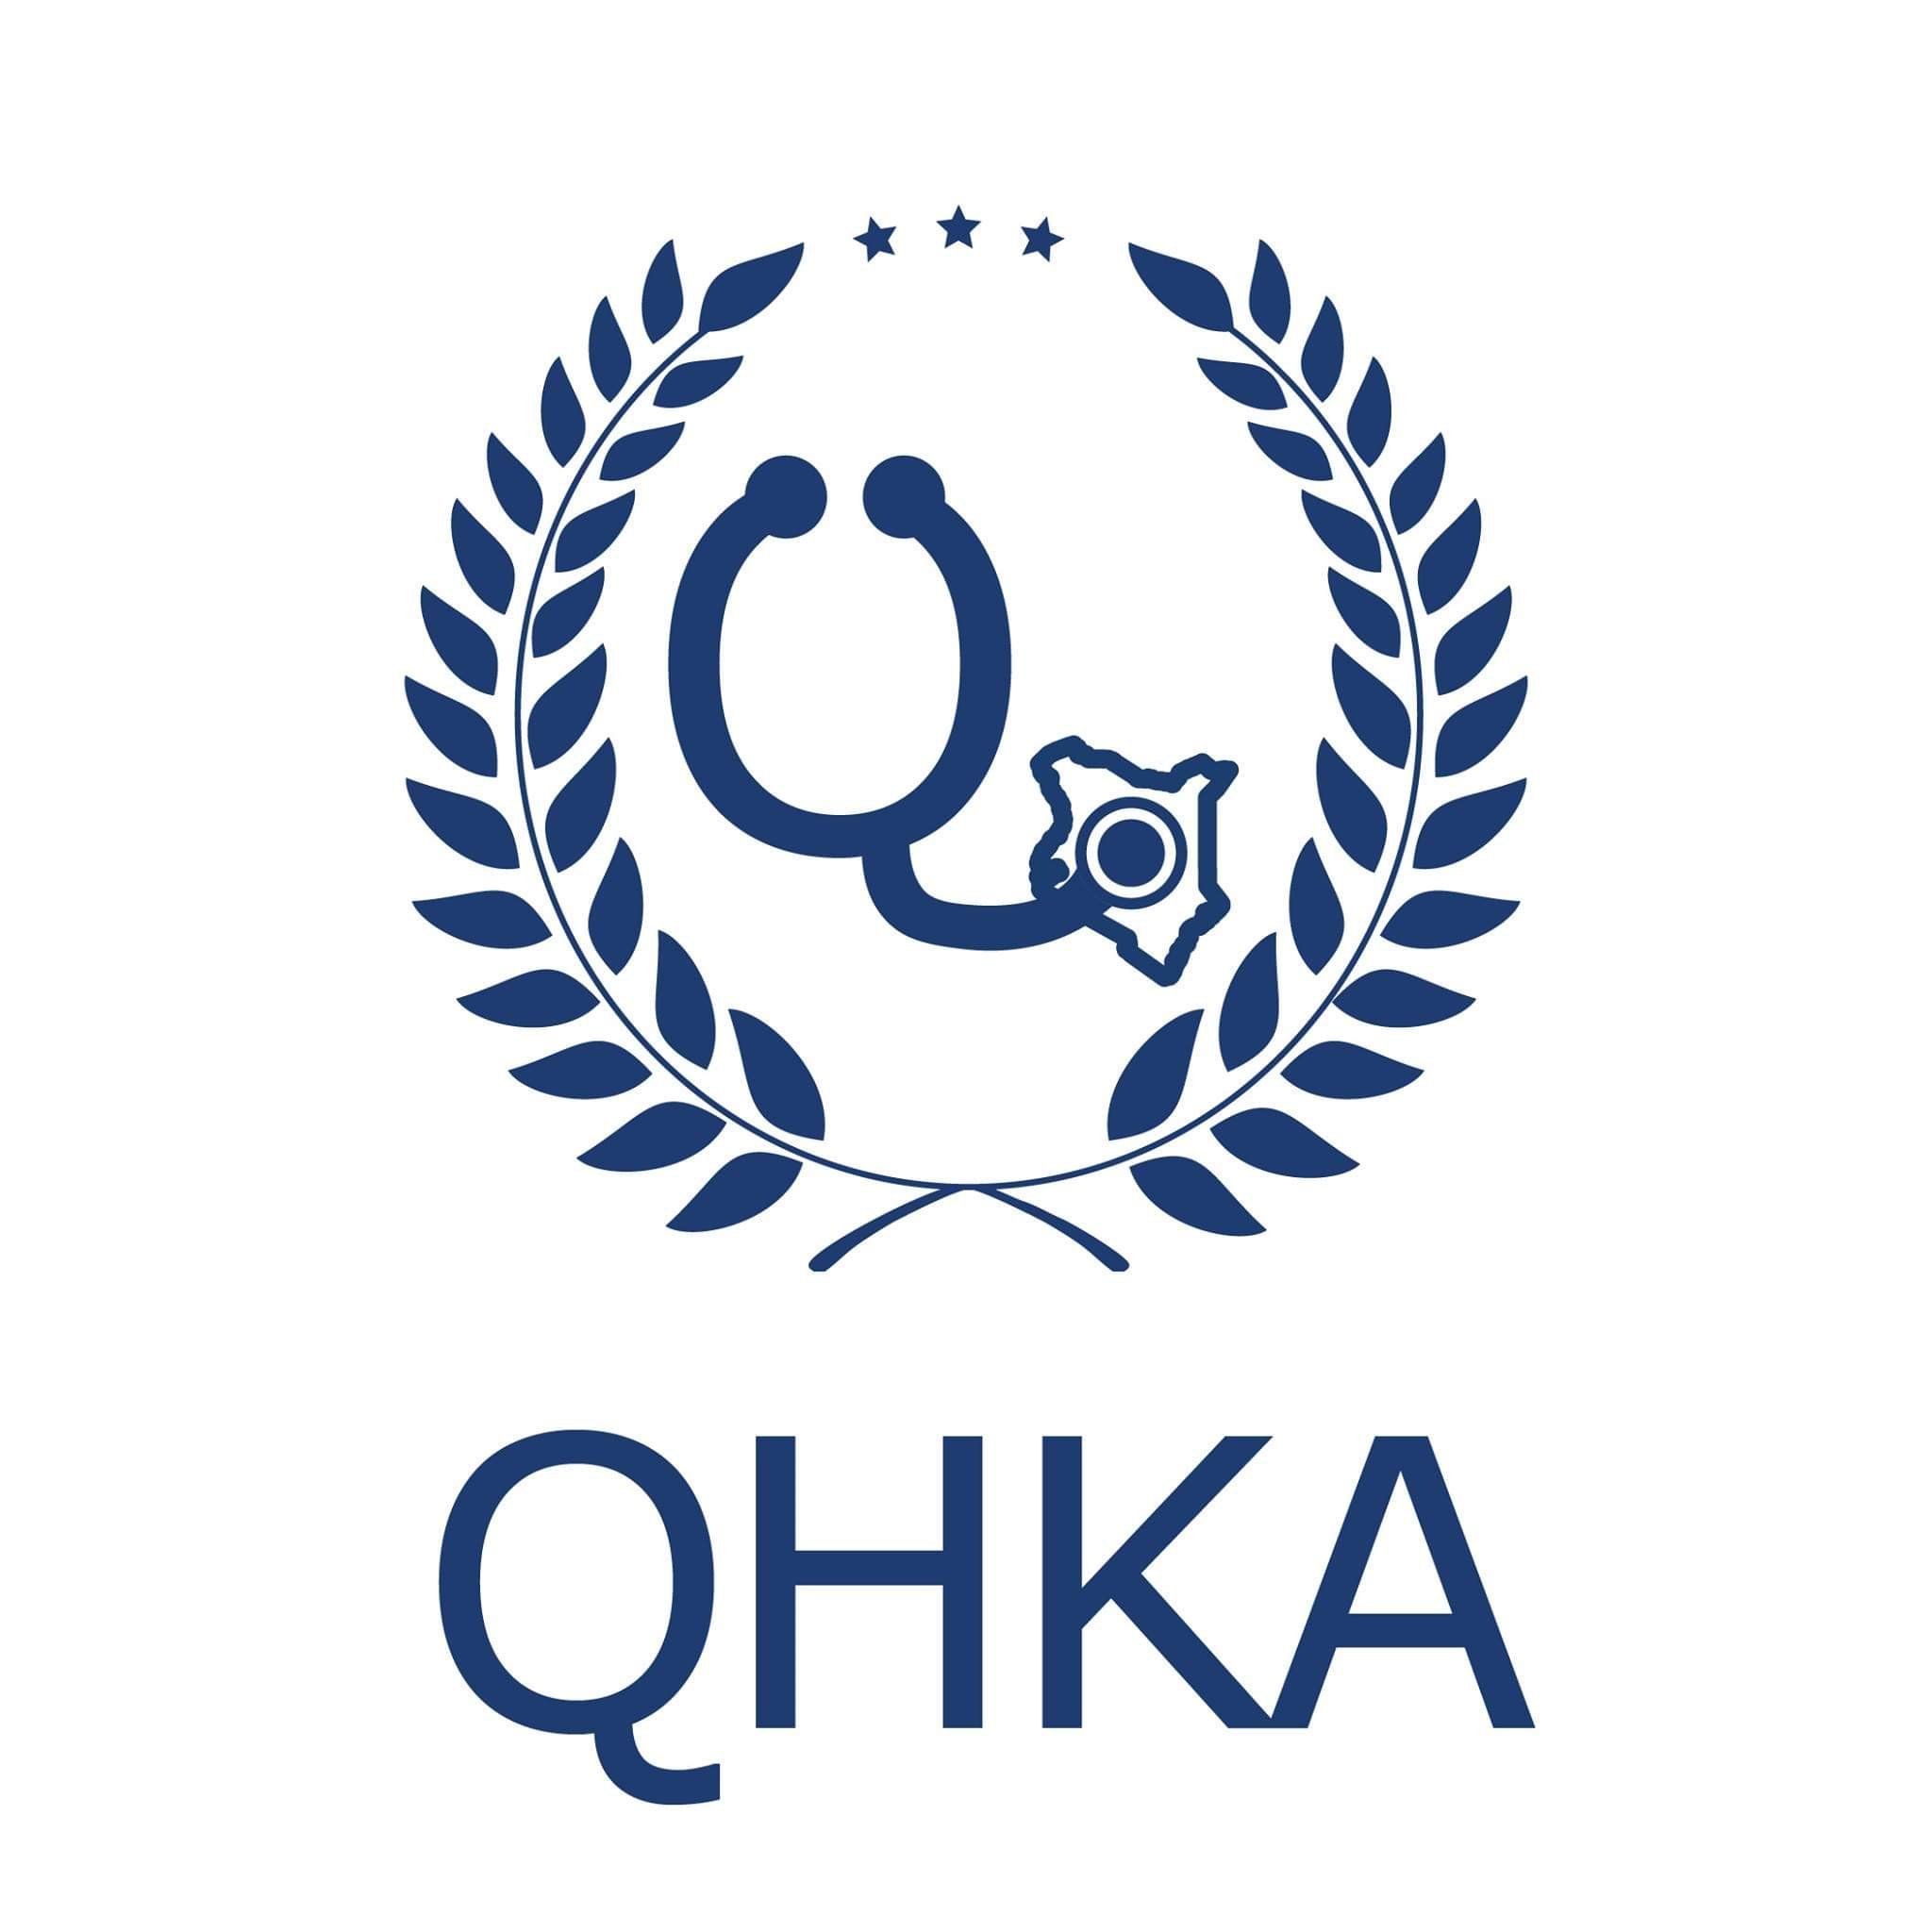 Improving the quality of healthcare for better health outcomes through a health systems strengthening approach #QHKAwards